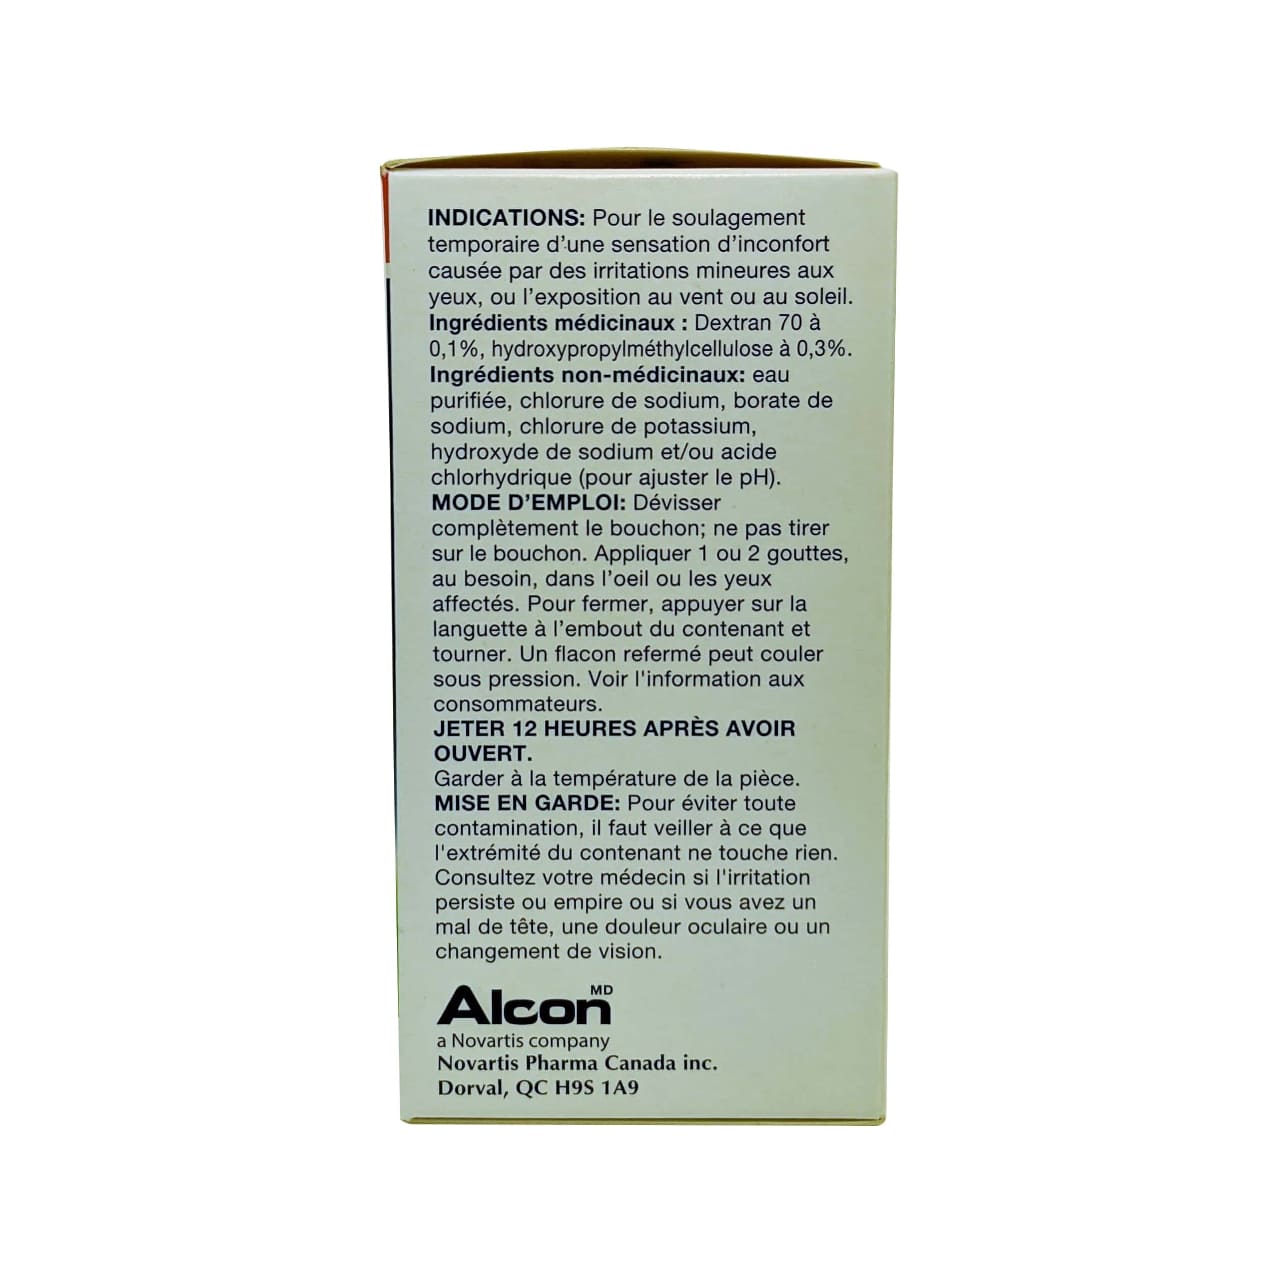 Indications, ingredients, directions, and warnings for Alcon Tears Naturale Free Lubricant Eye Drops in French